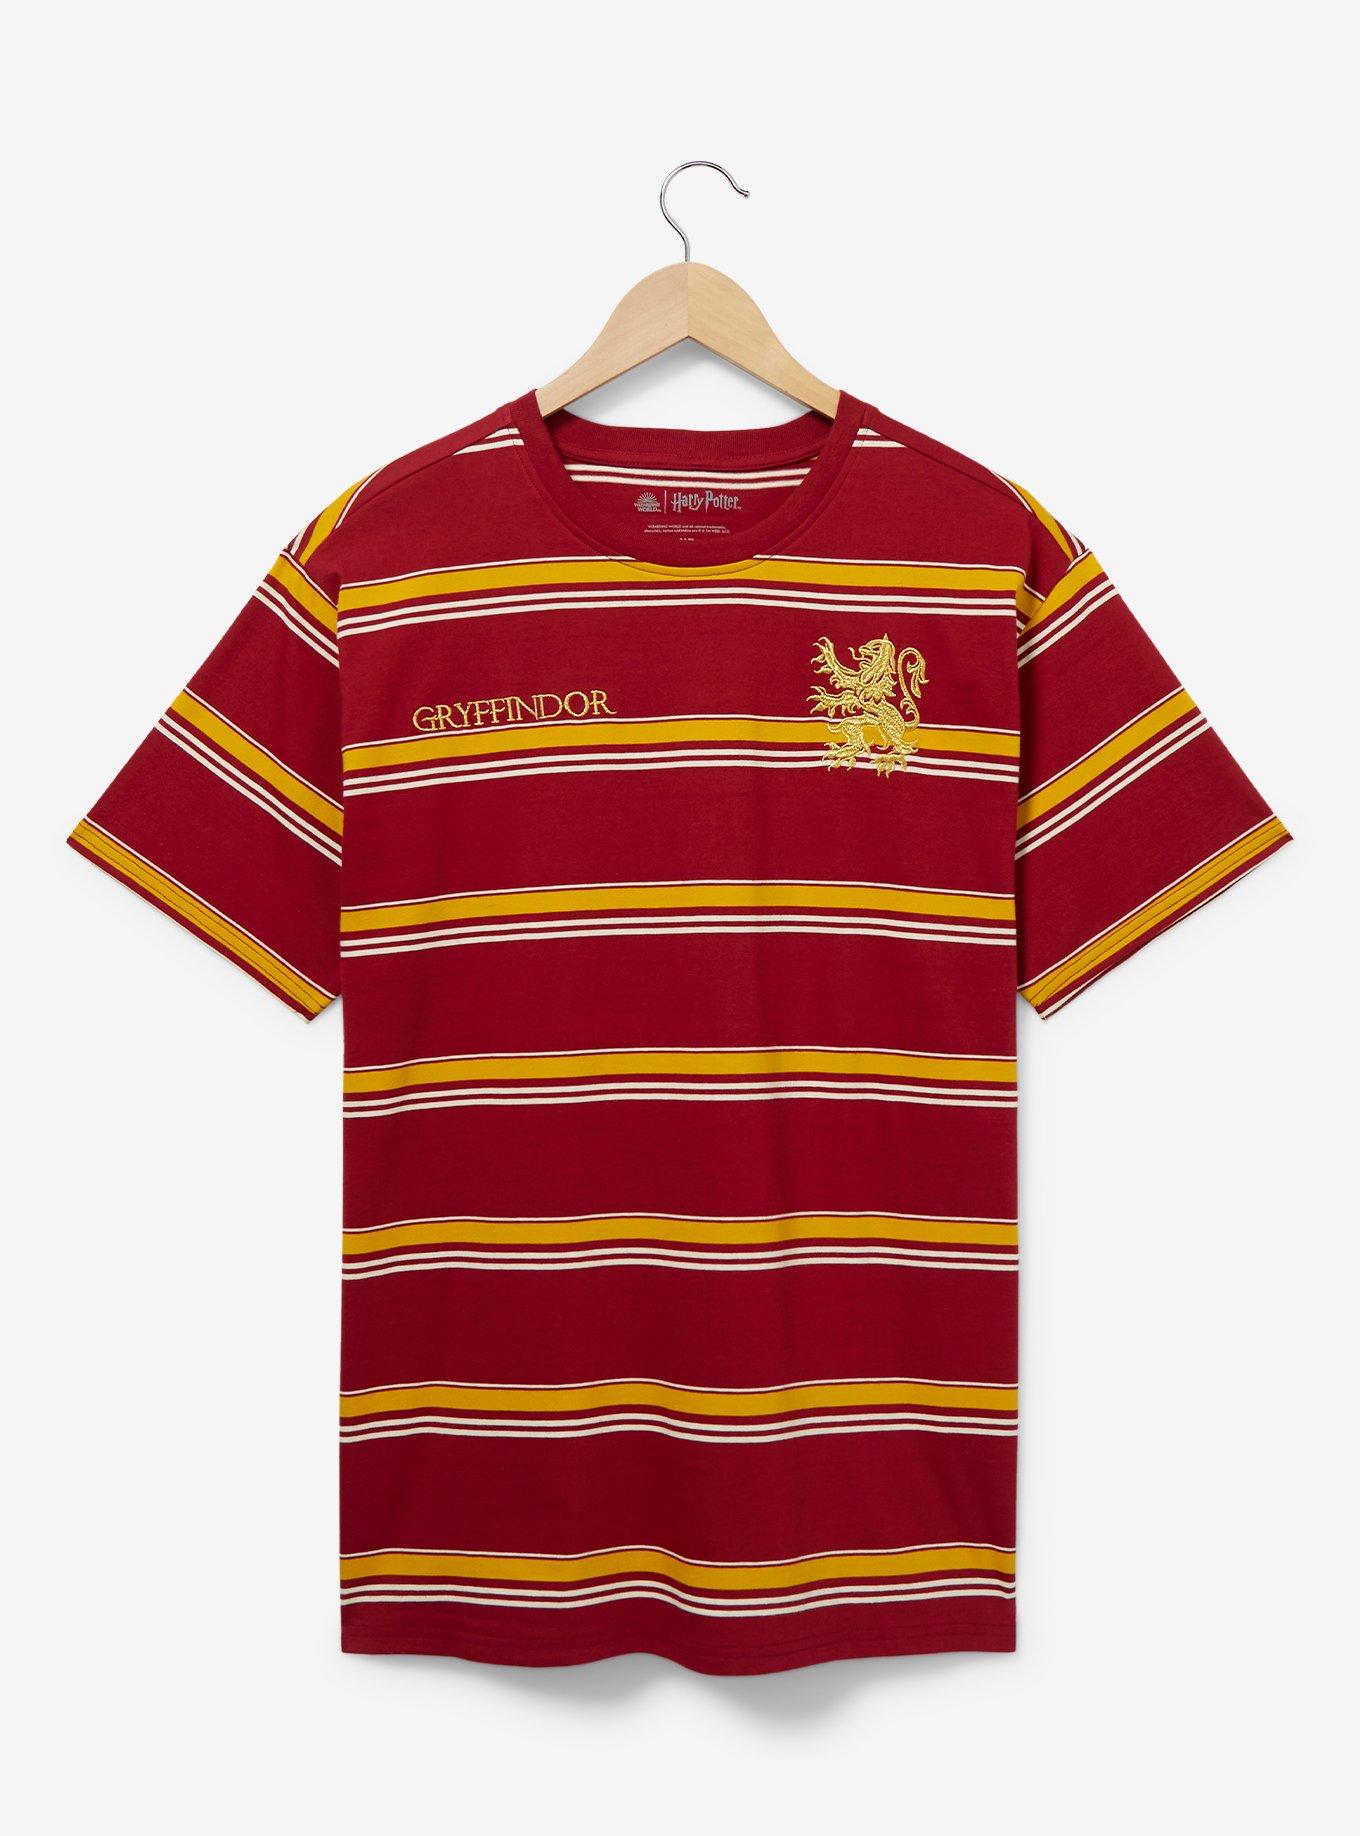 Harry Potter Striped Gryffindor Mascot T-Shirt - BoxLunch Exclusive |  BoxLunch